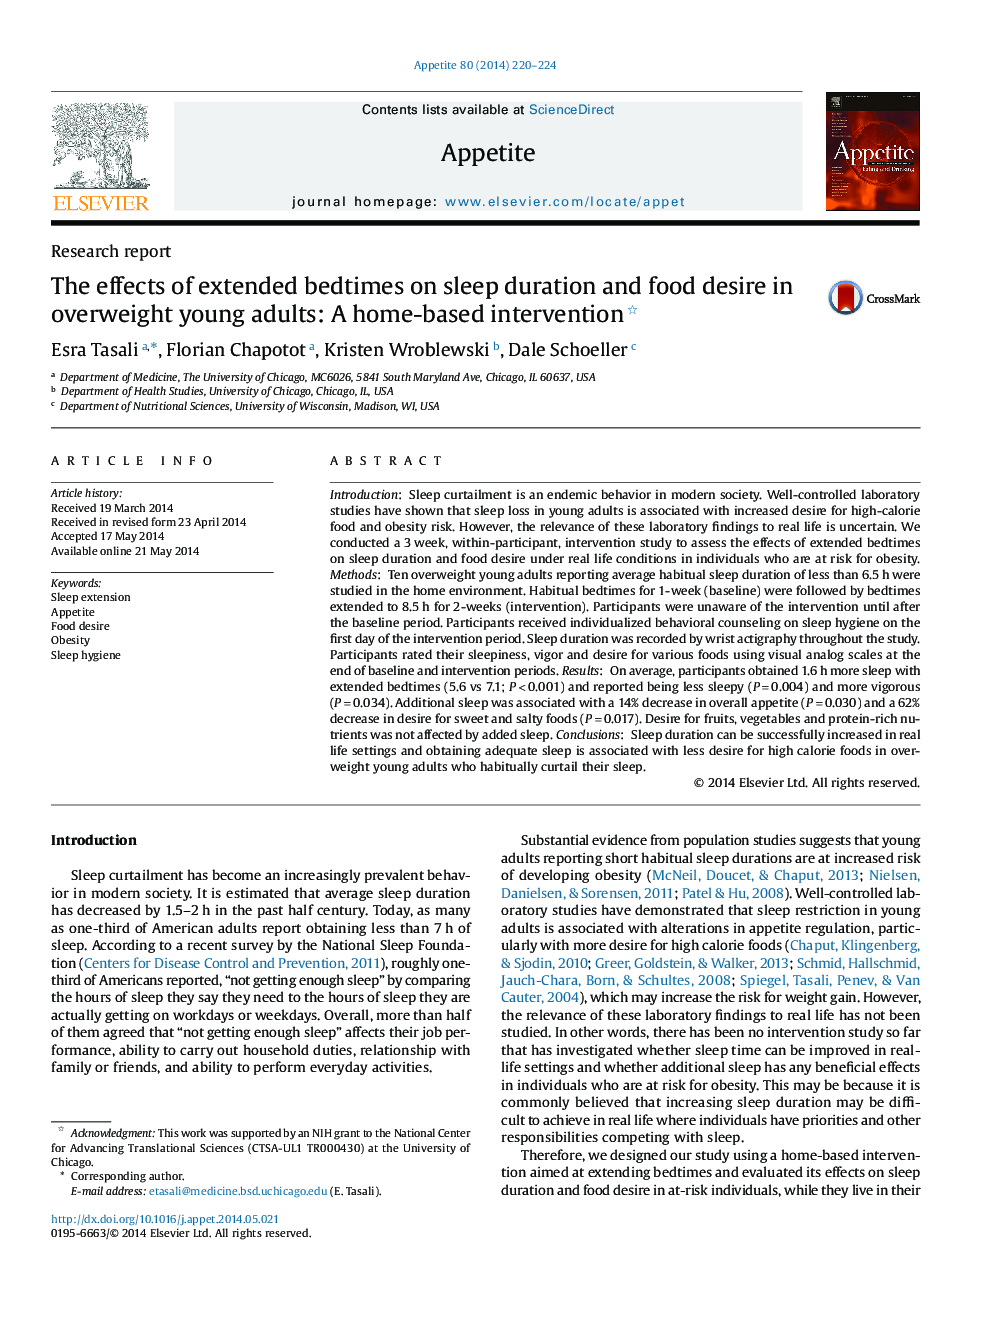 The effects of extended bedtimes on sleep duration and food desire in overweight young adults: A home-based intervention 